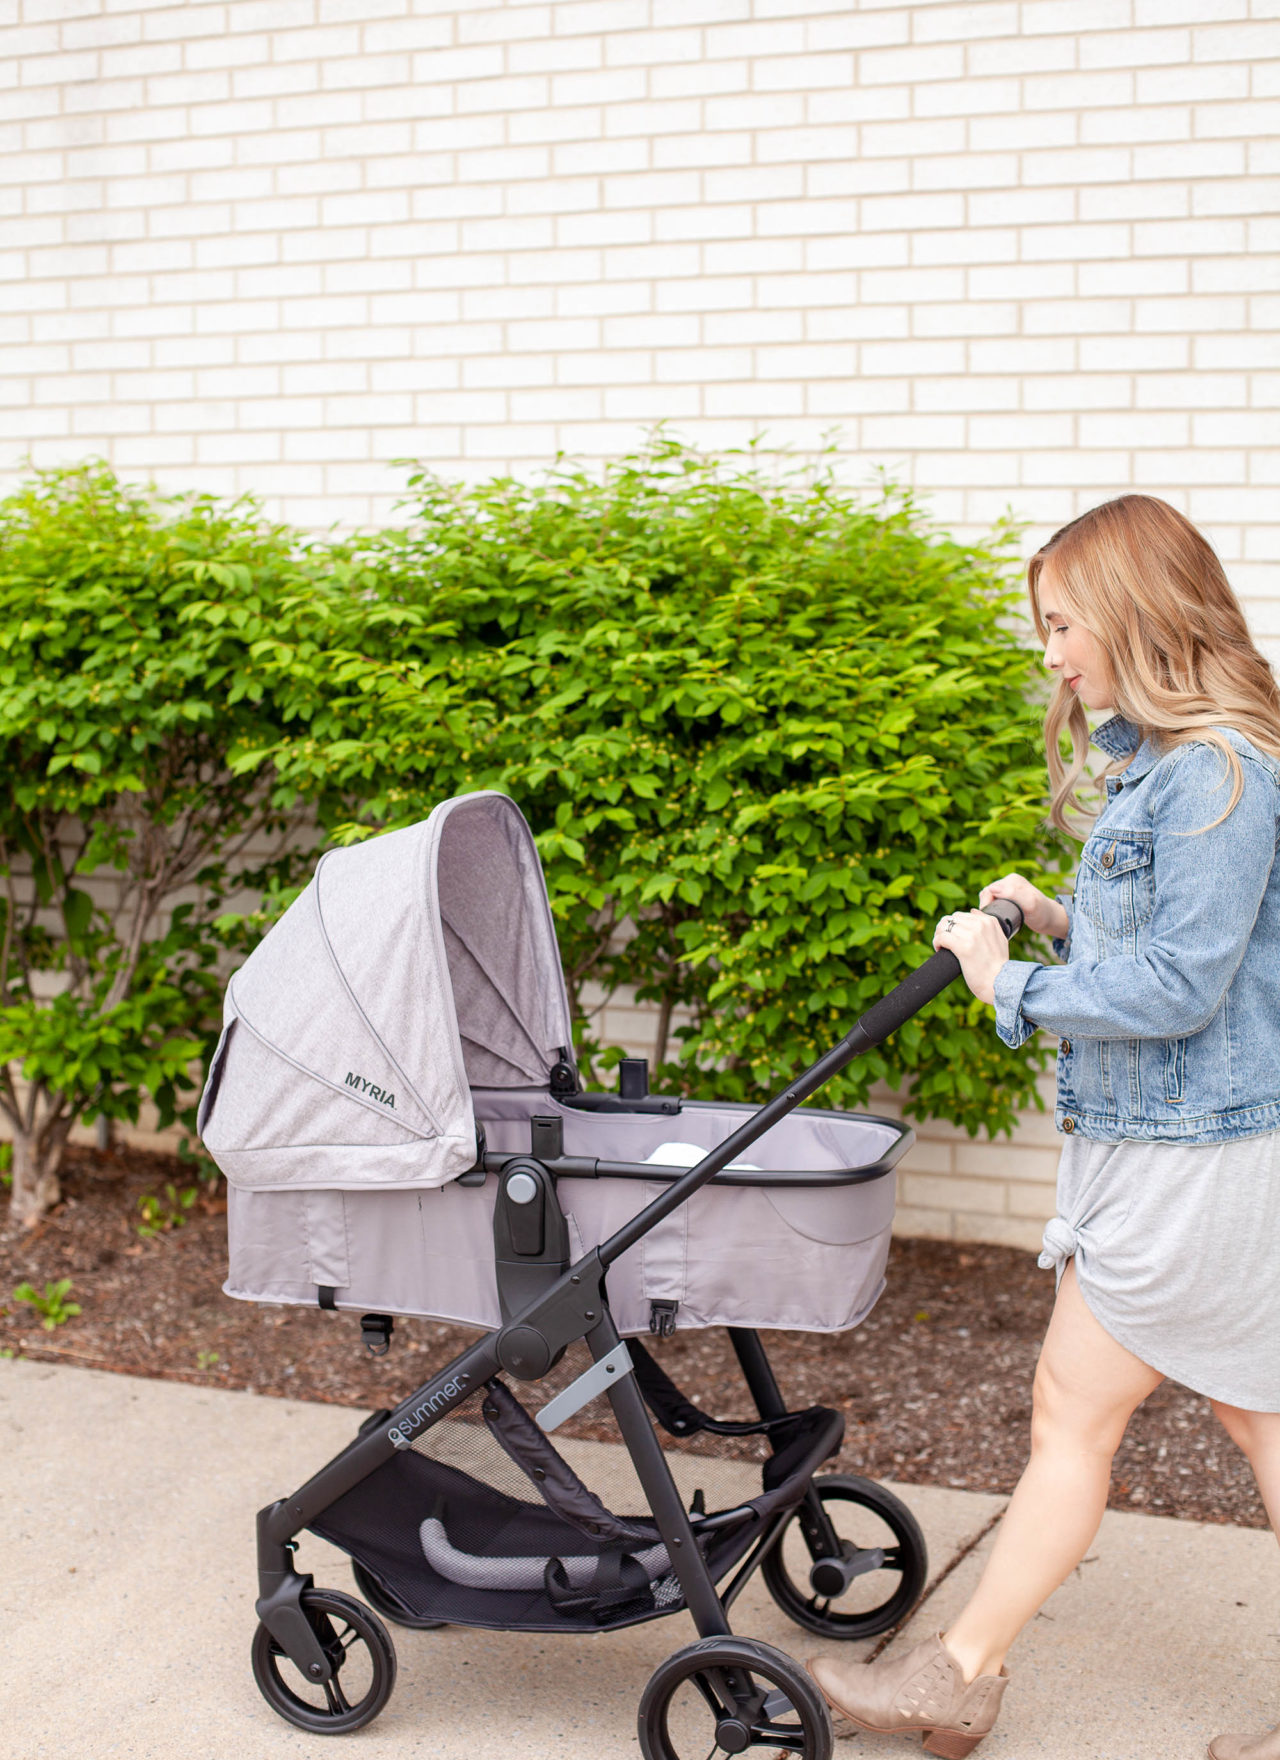 Family Time With The Summer Infant Myria Travel System